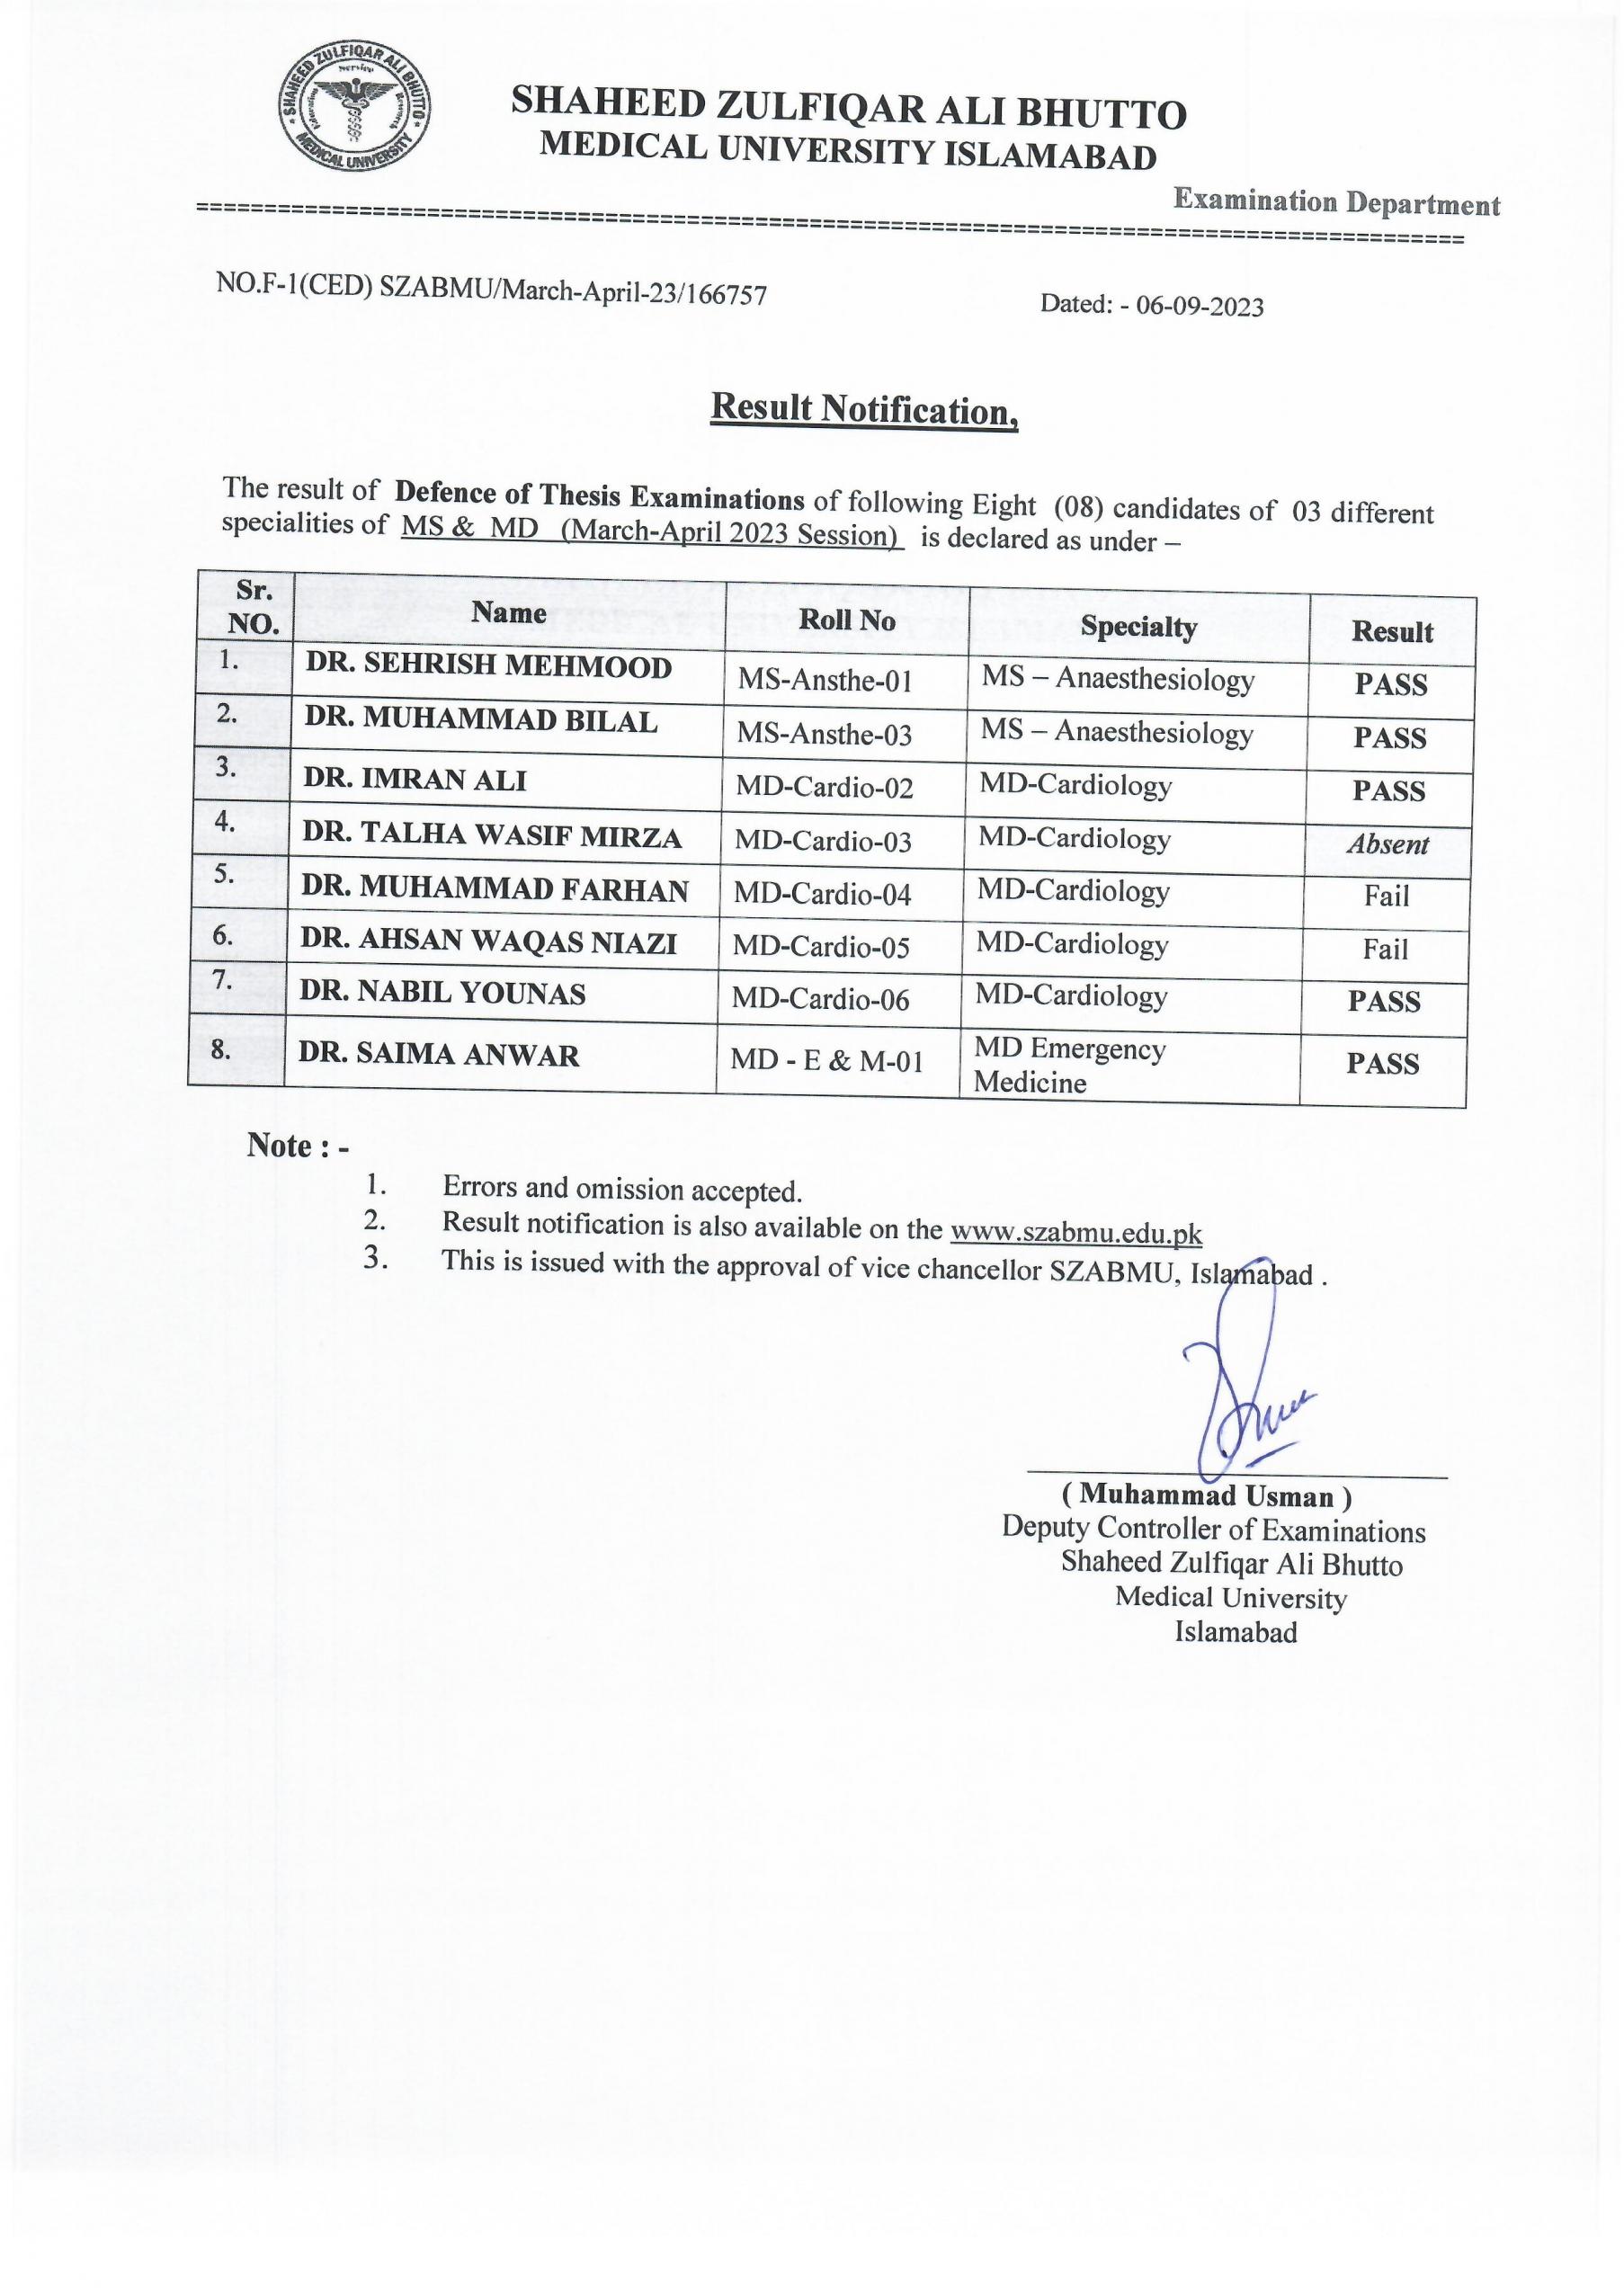 Result Notification Defence of thesis examination, March/April 2023 session